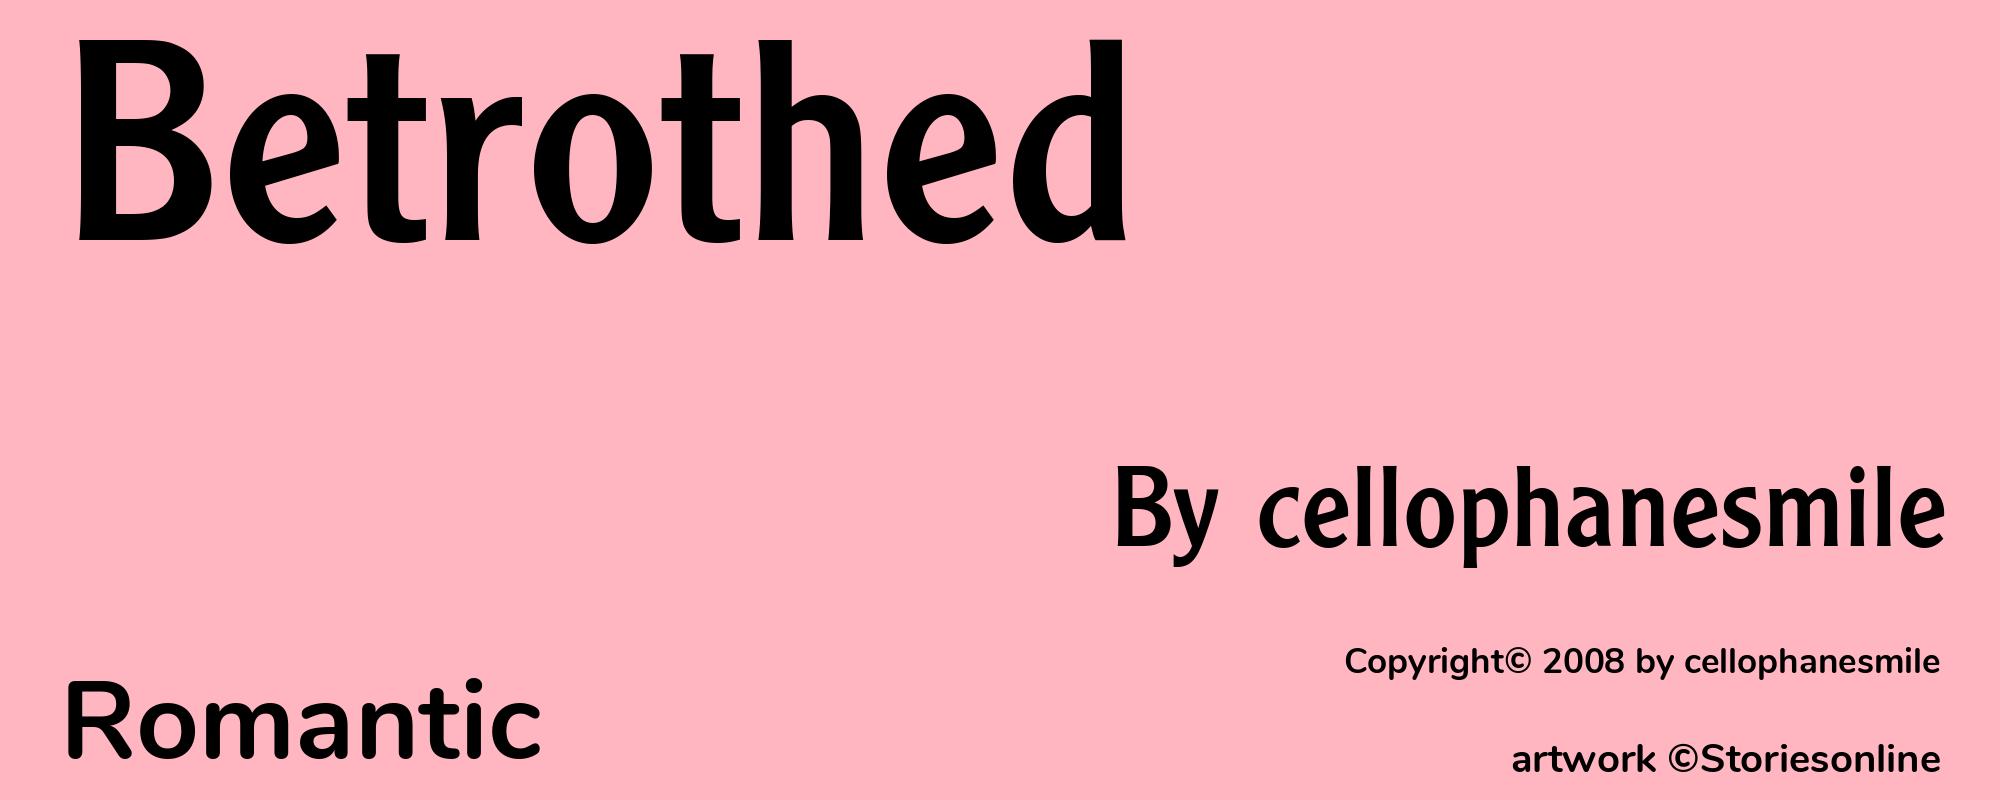 Betrothed - Cover